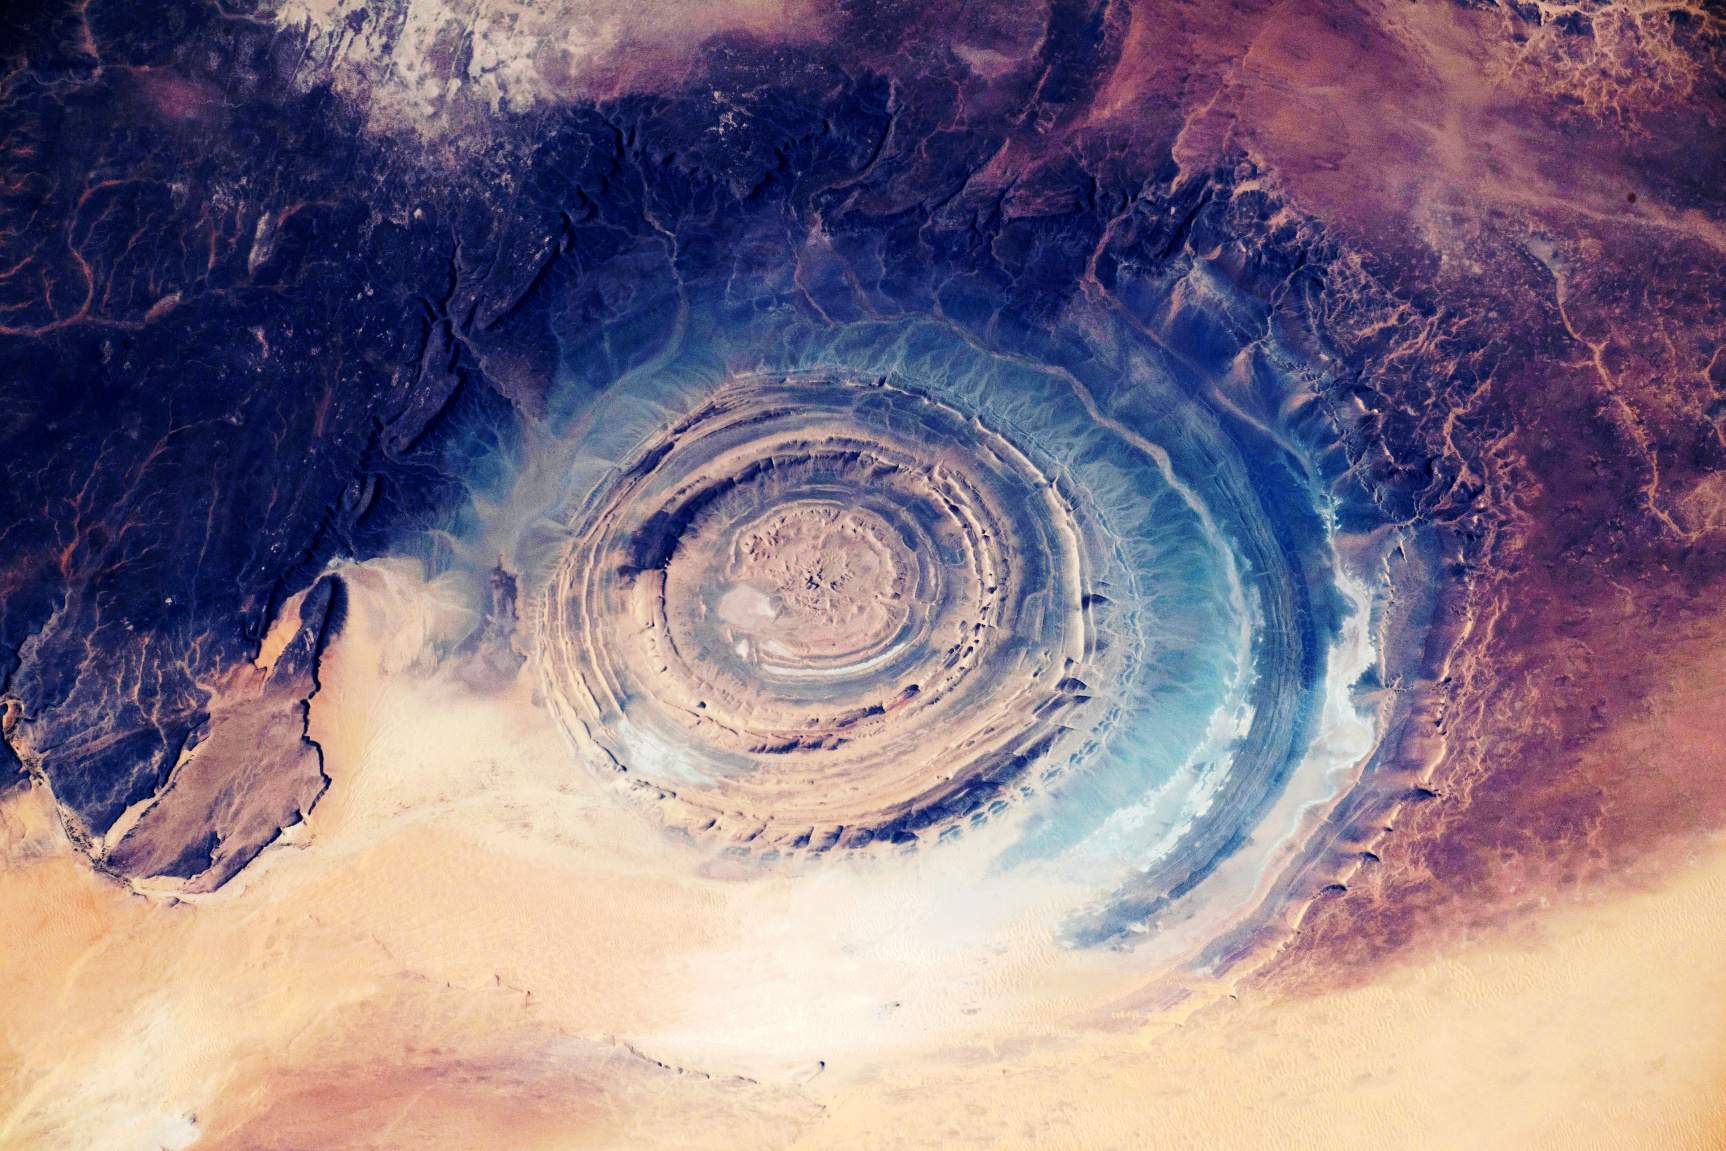 Richat strucuture: Is this Atlantis, hiding in plain sight in the Sahara? 4